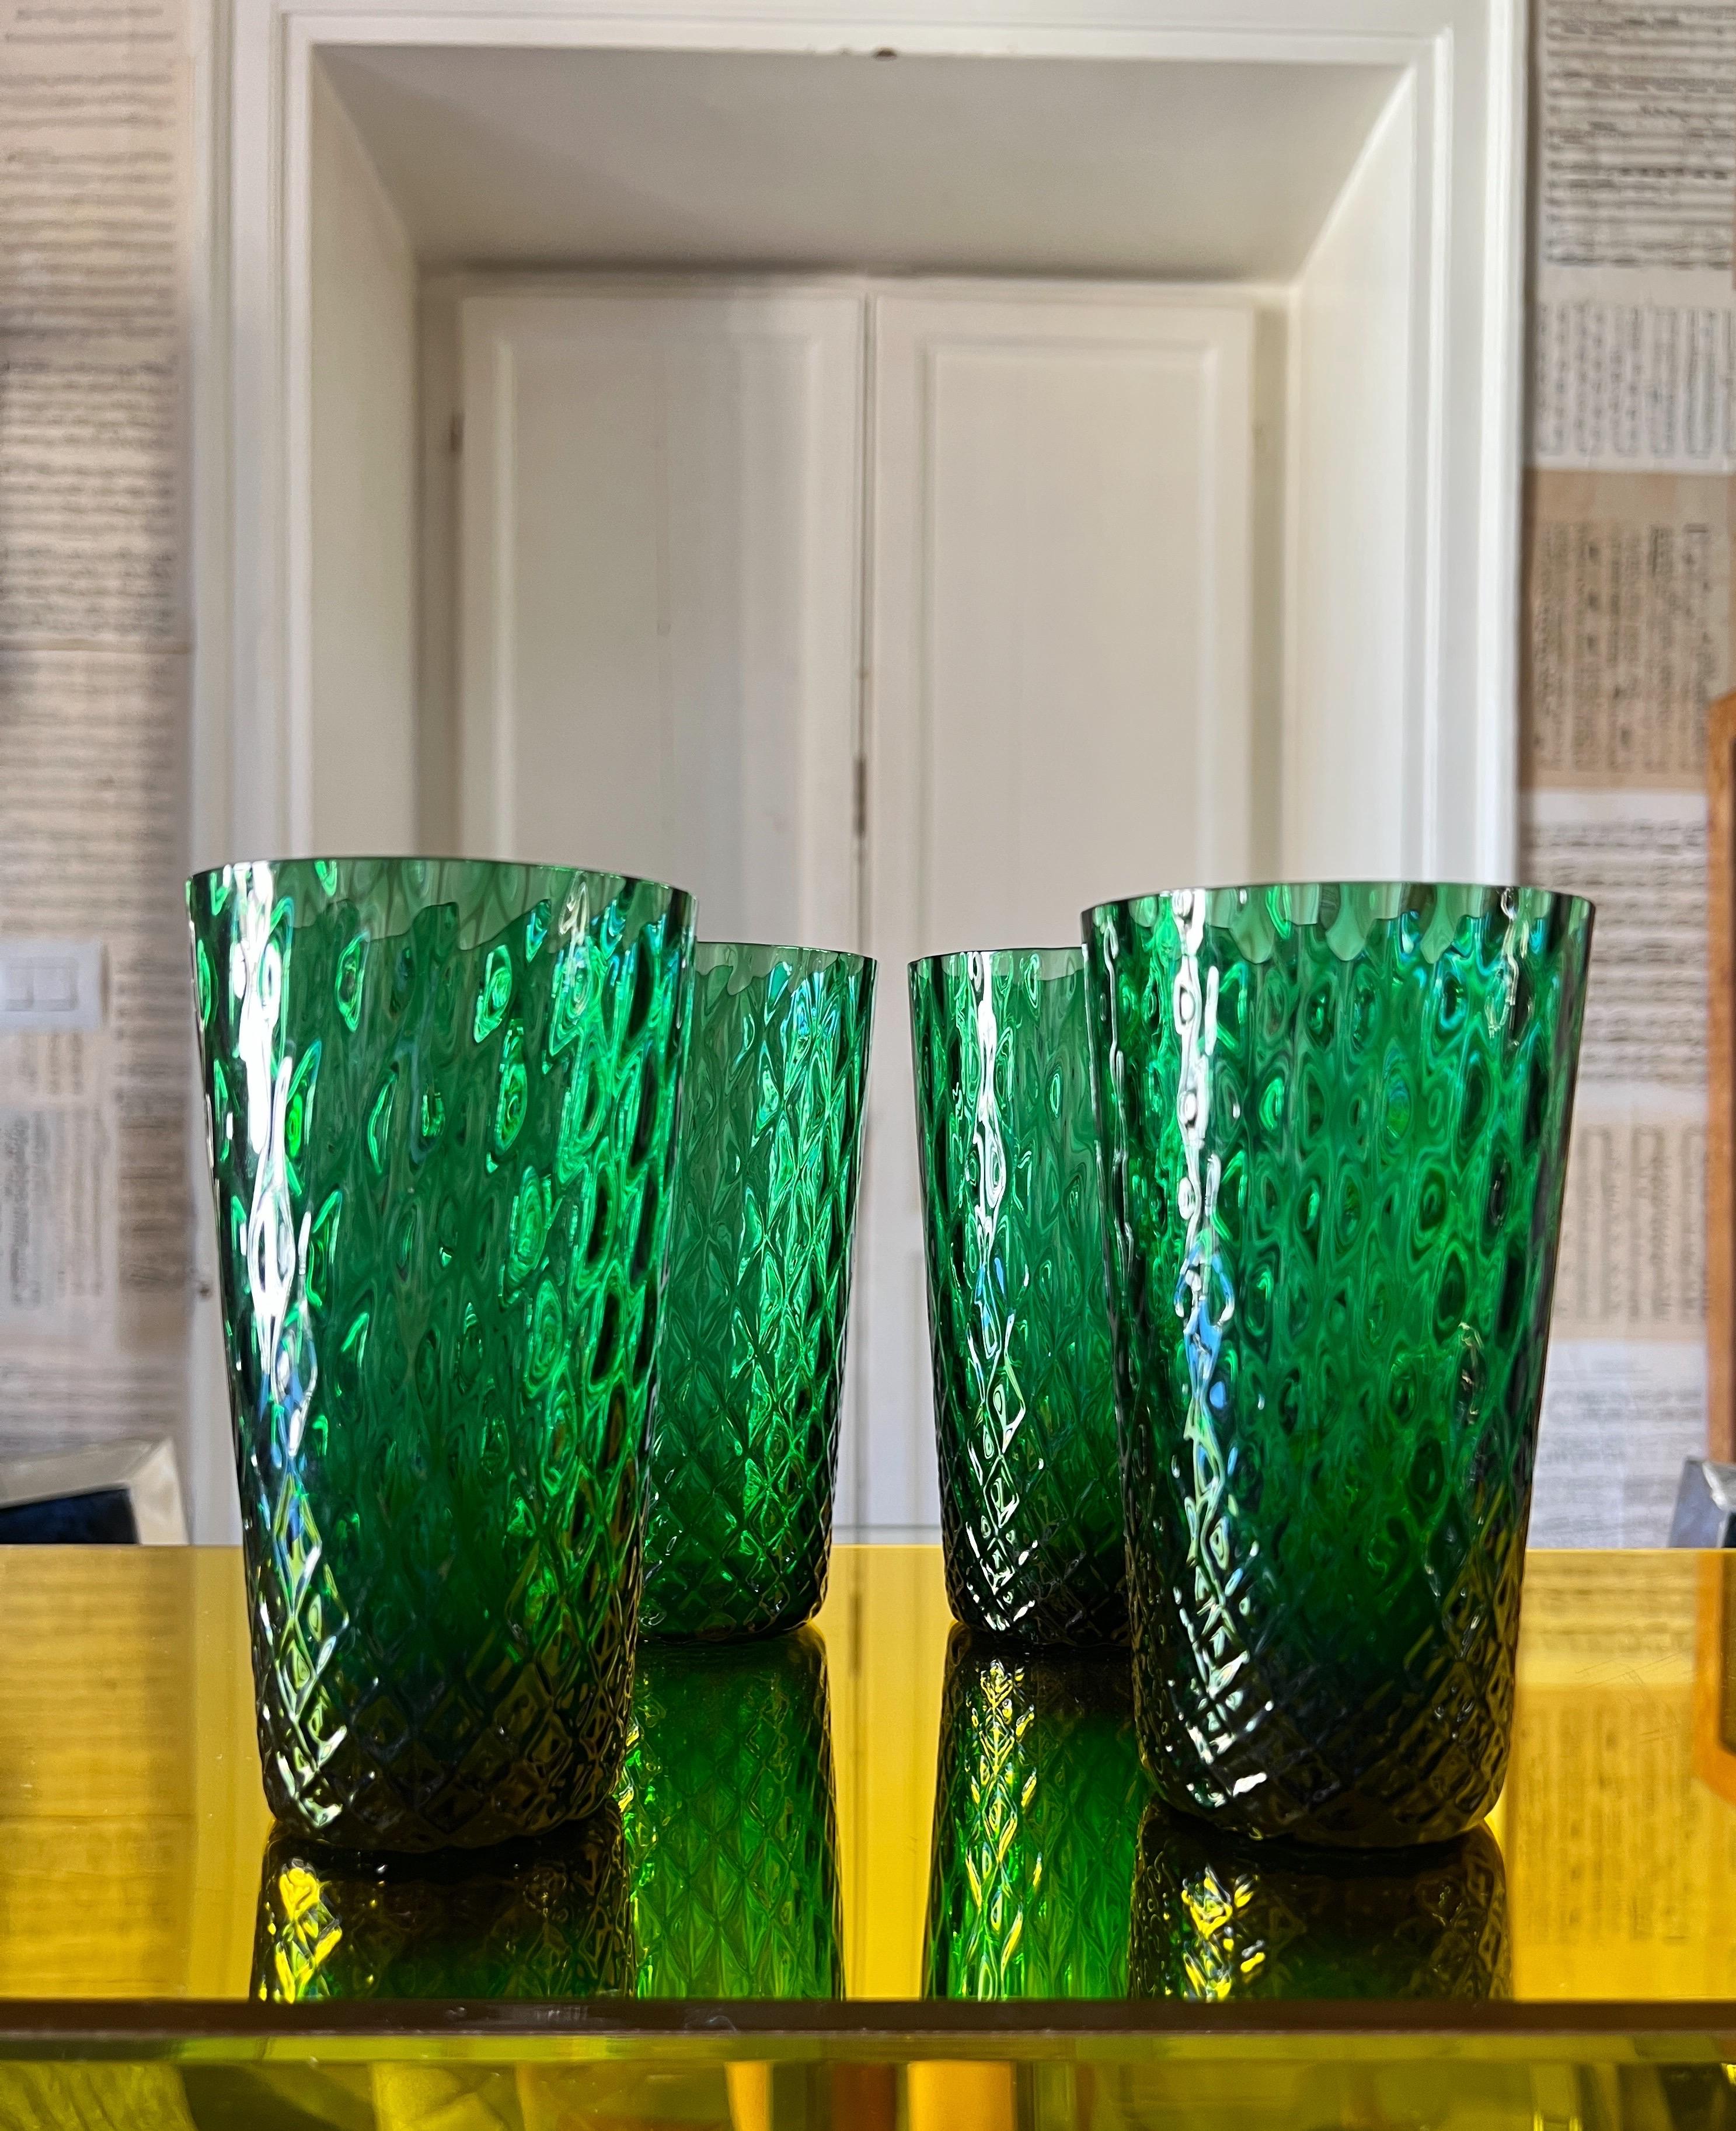 Mid-Centery modern drinking glasses, attributed to Carlo Scarpa  In Good Condition For Sale In Palermo, PA